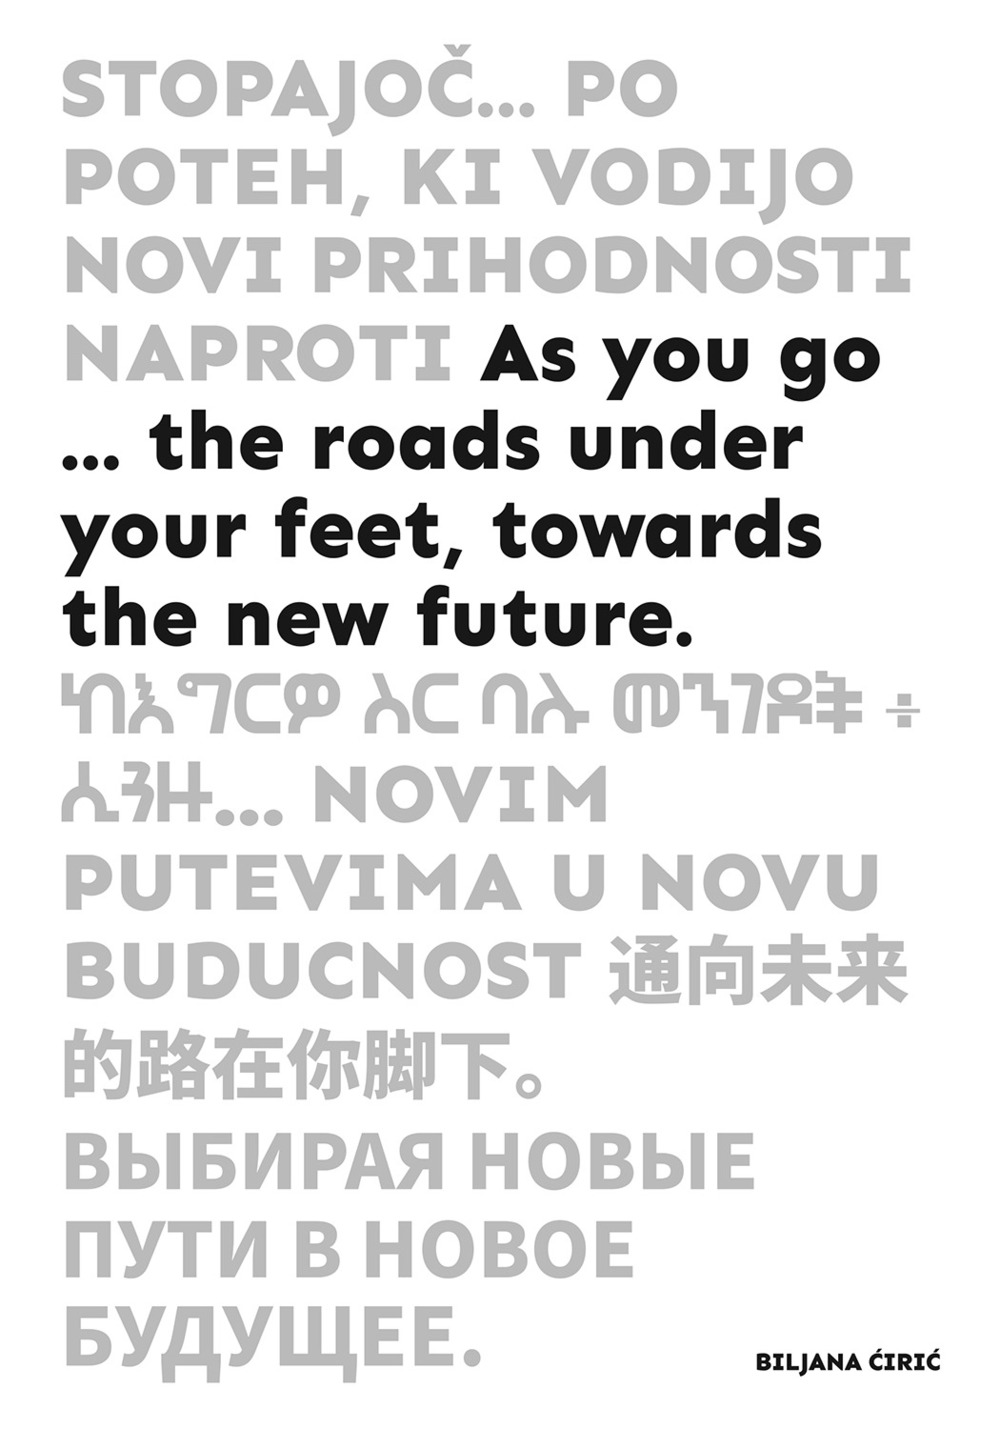 As you go... the roads under your feet, towards the new future